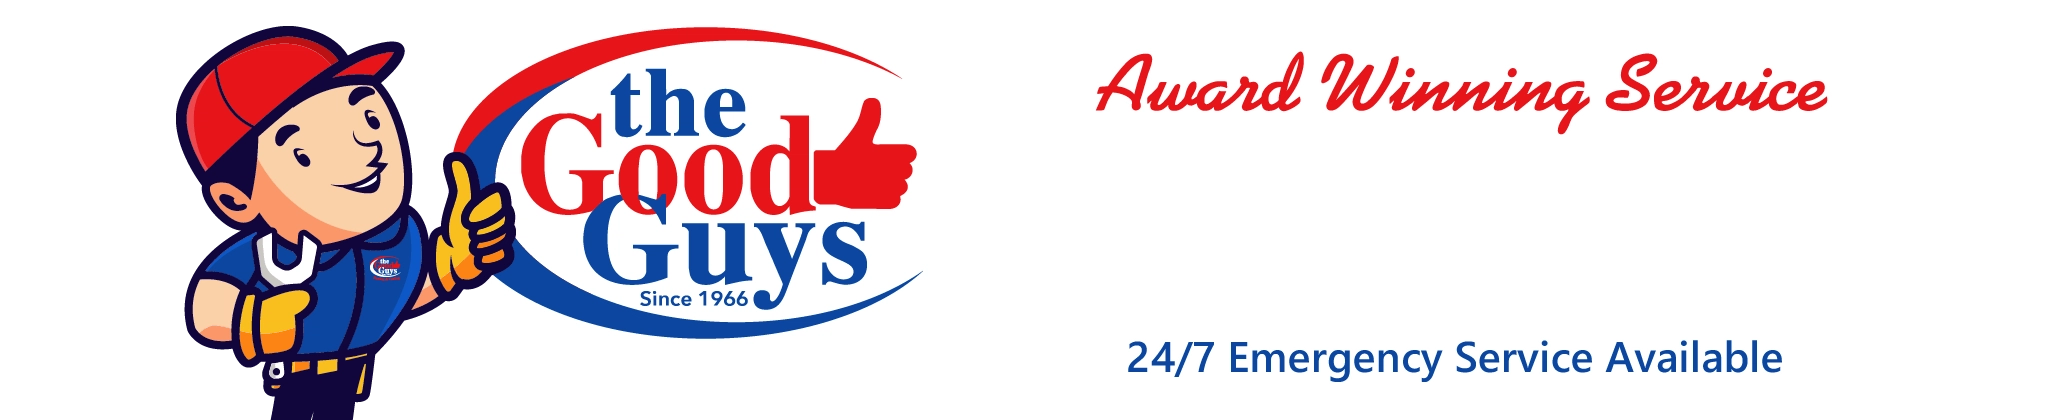 The Good Guys Heating & Cooling Logo